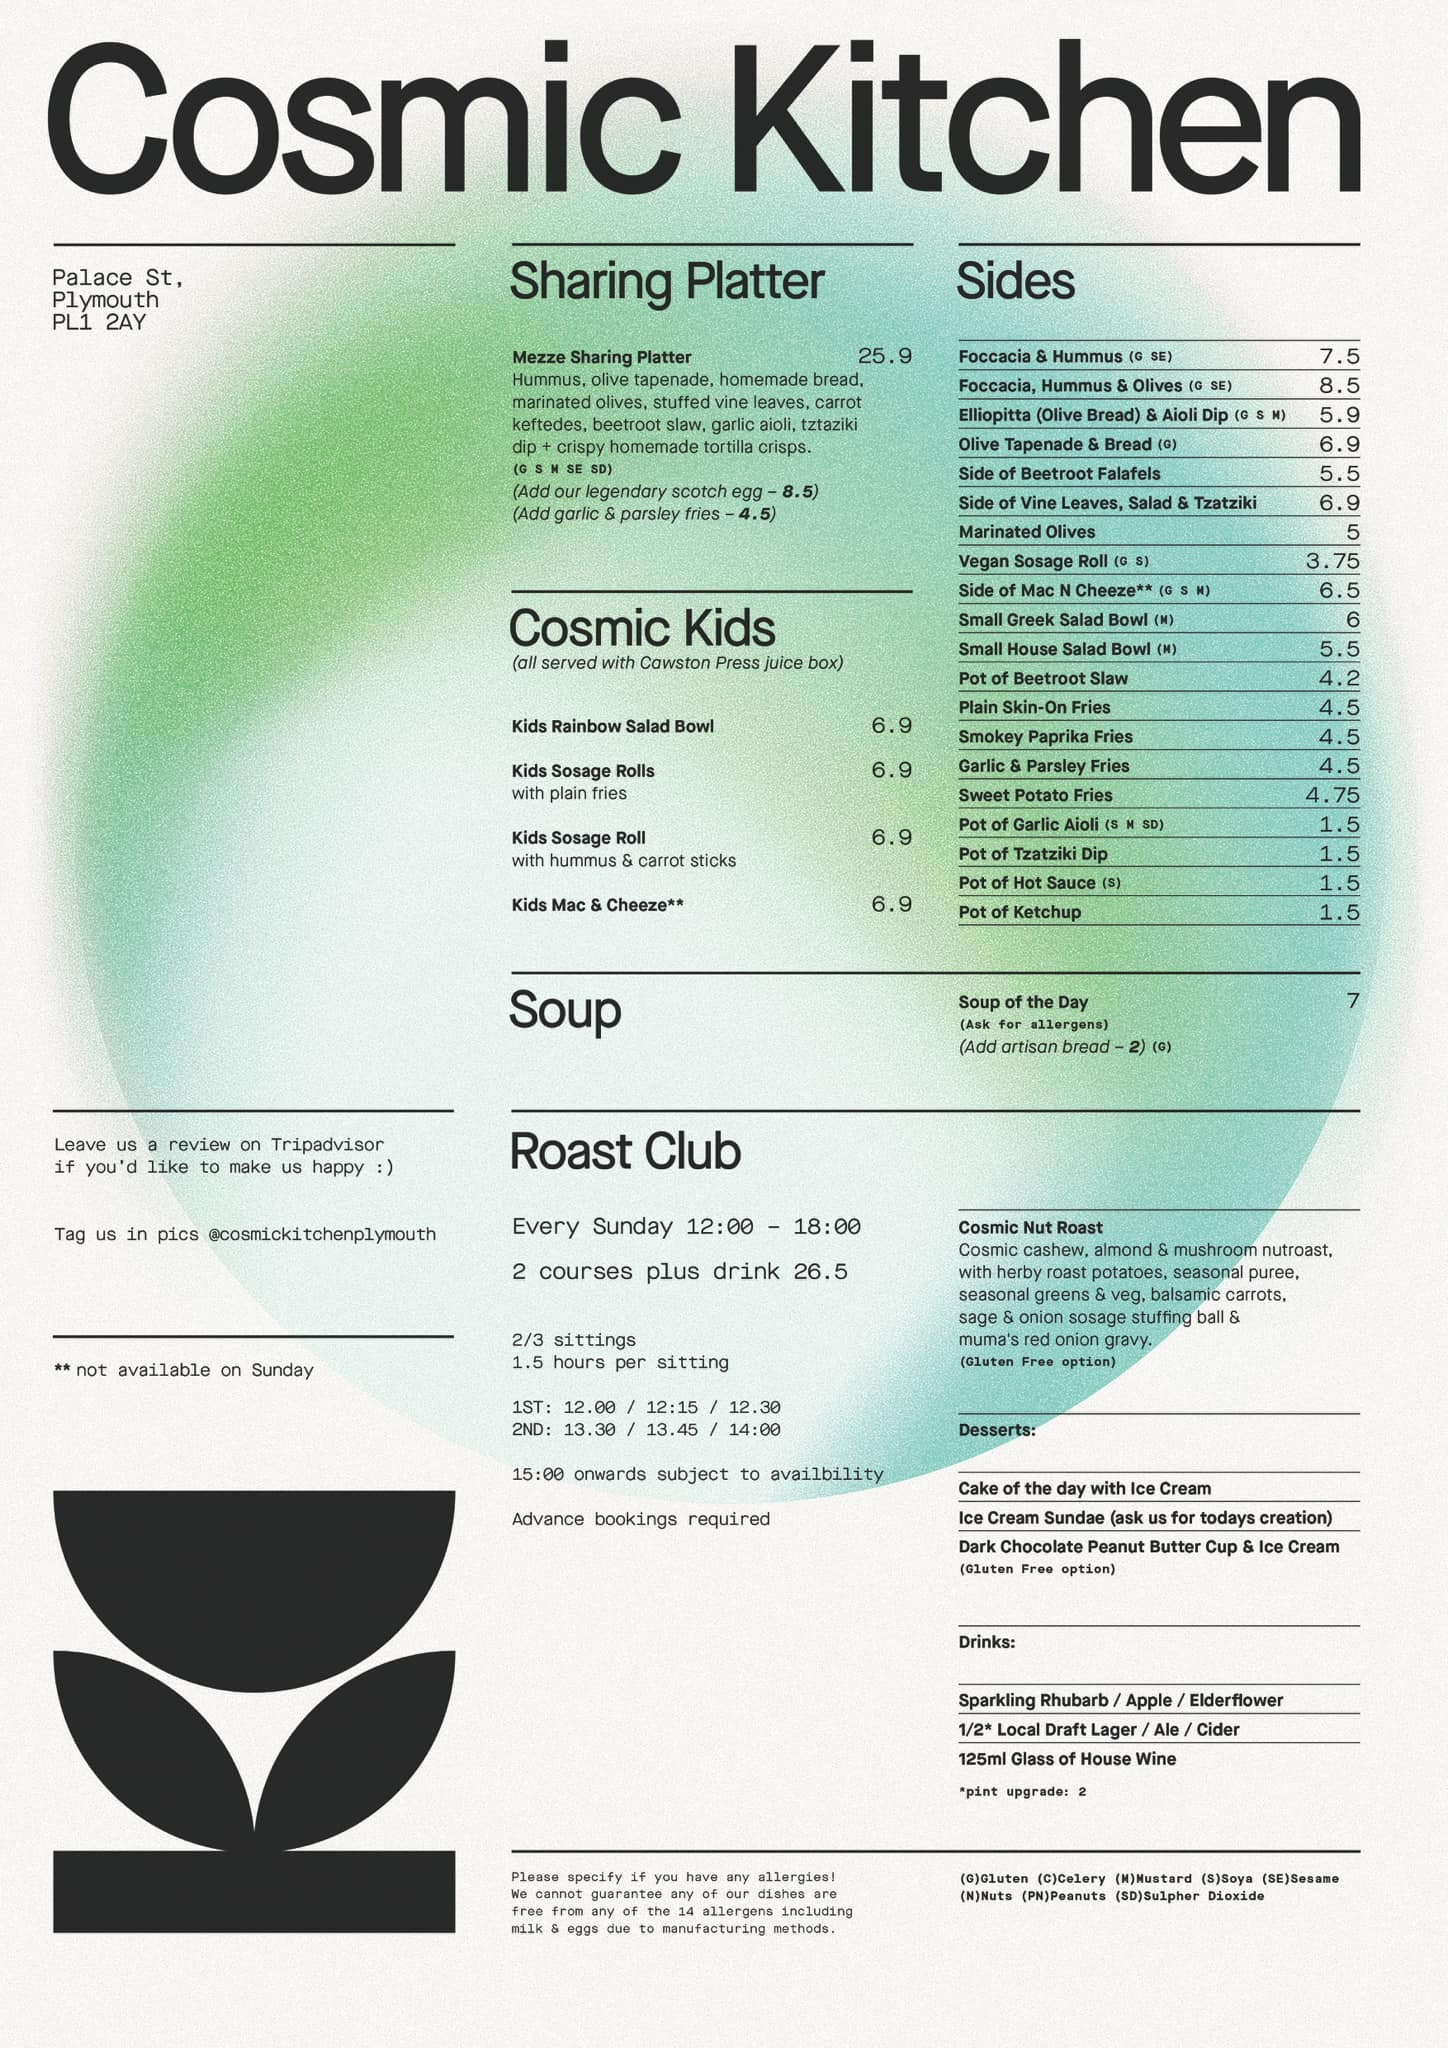 image of the Cosmic Kitchen menu - page 2